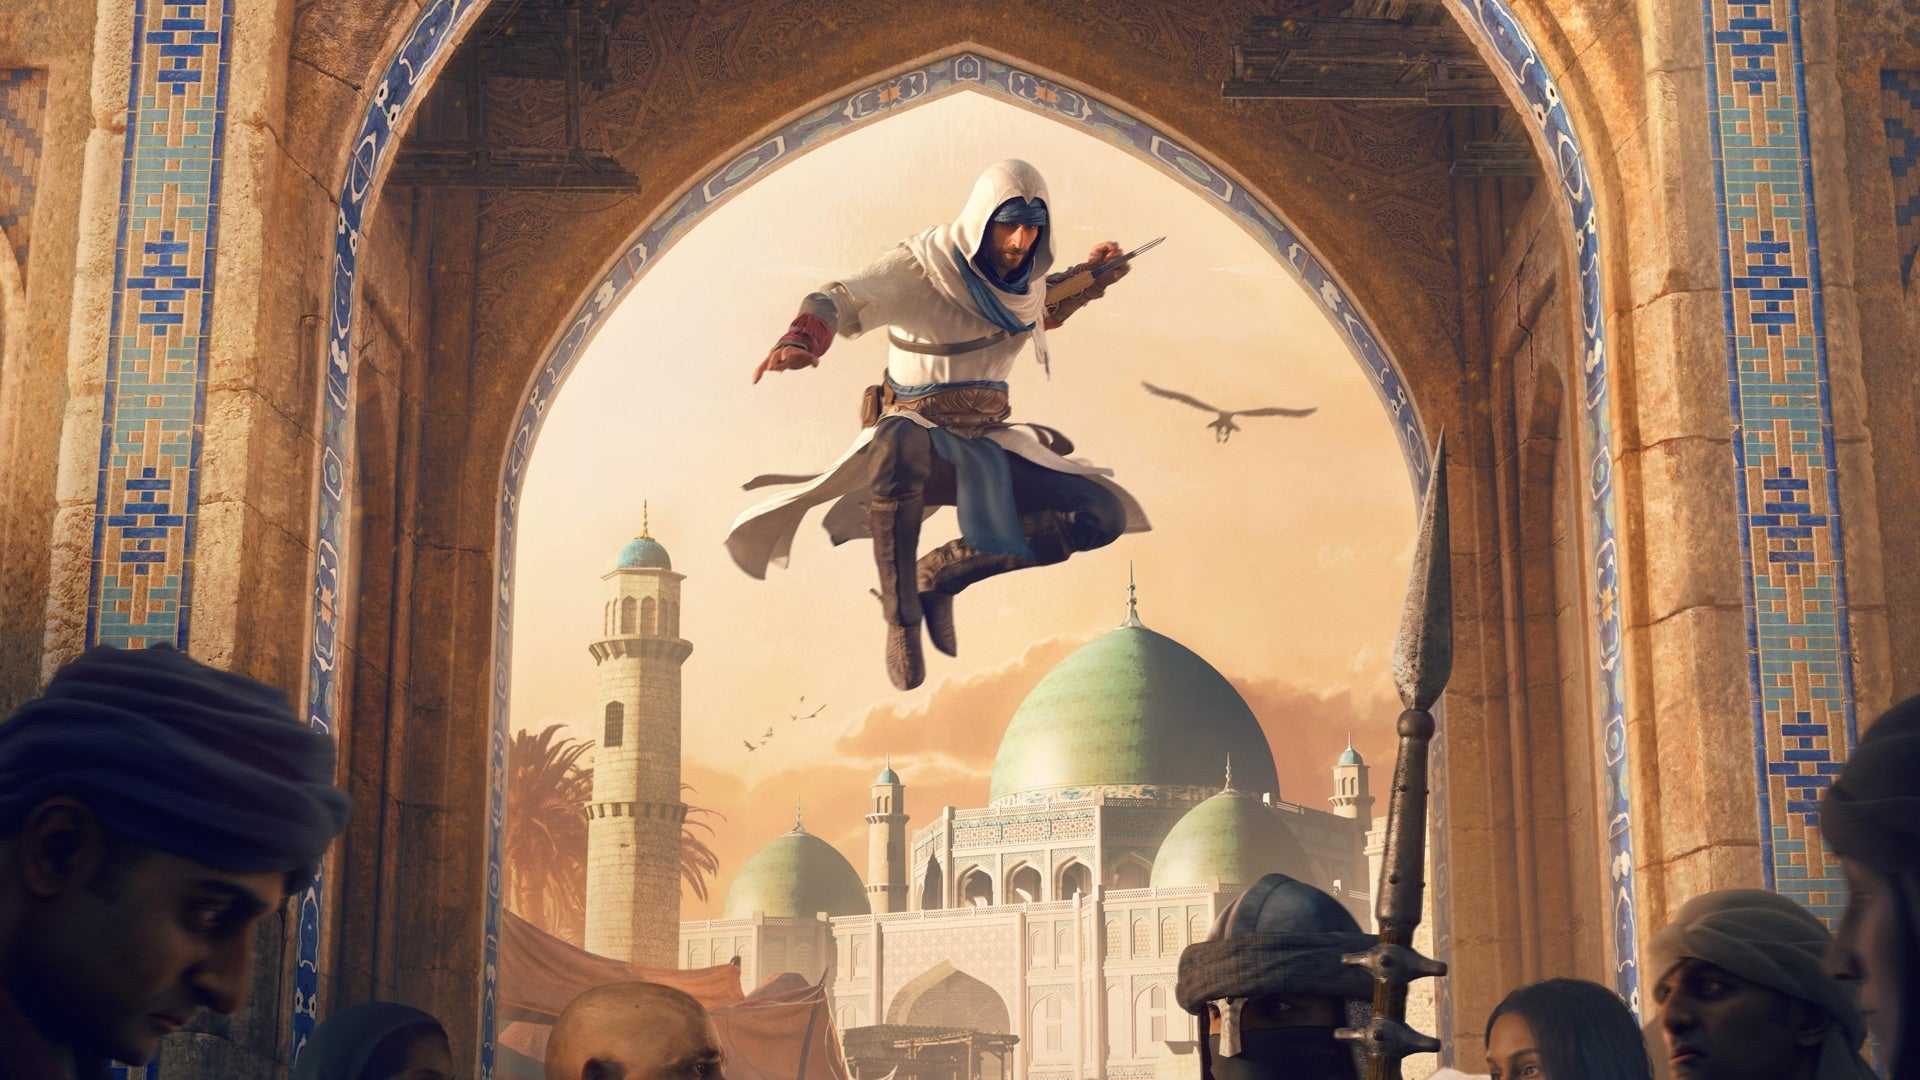 Image for This week's Ubisoft Forward digital showcase will "unveil the future" of Assassin's Creed